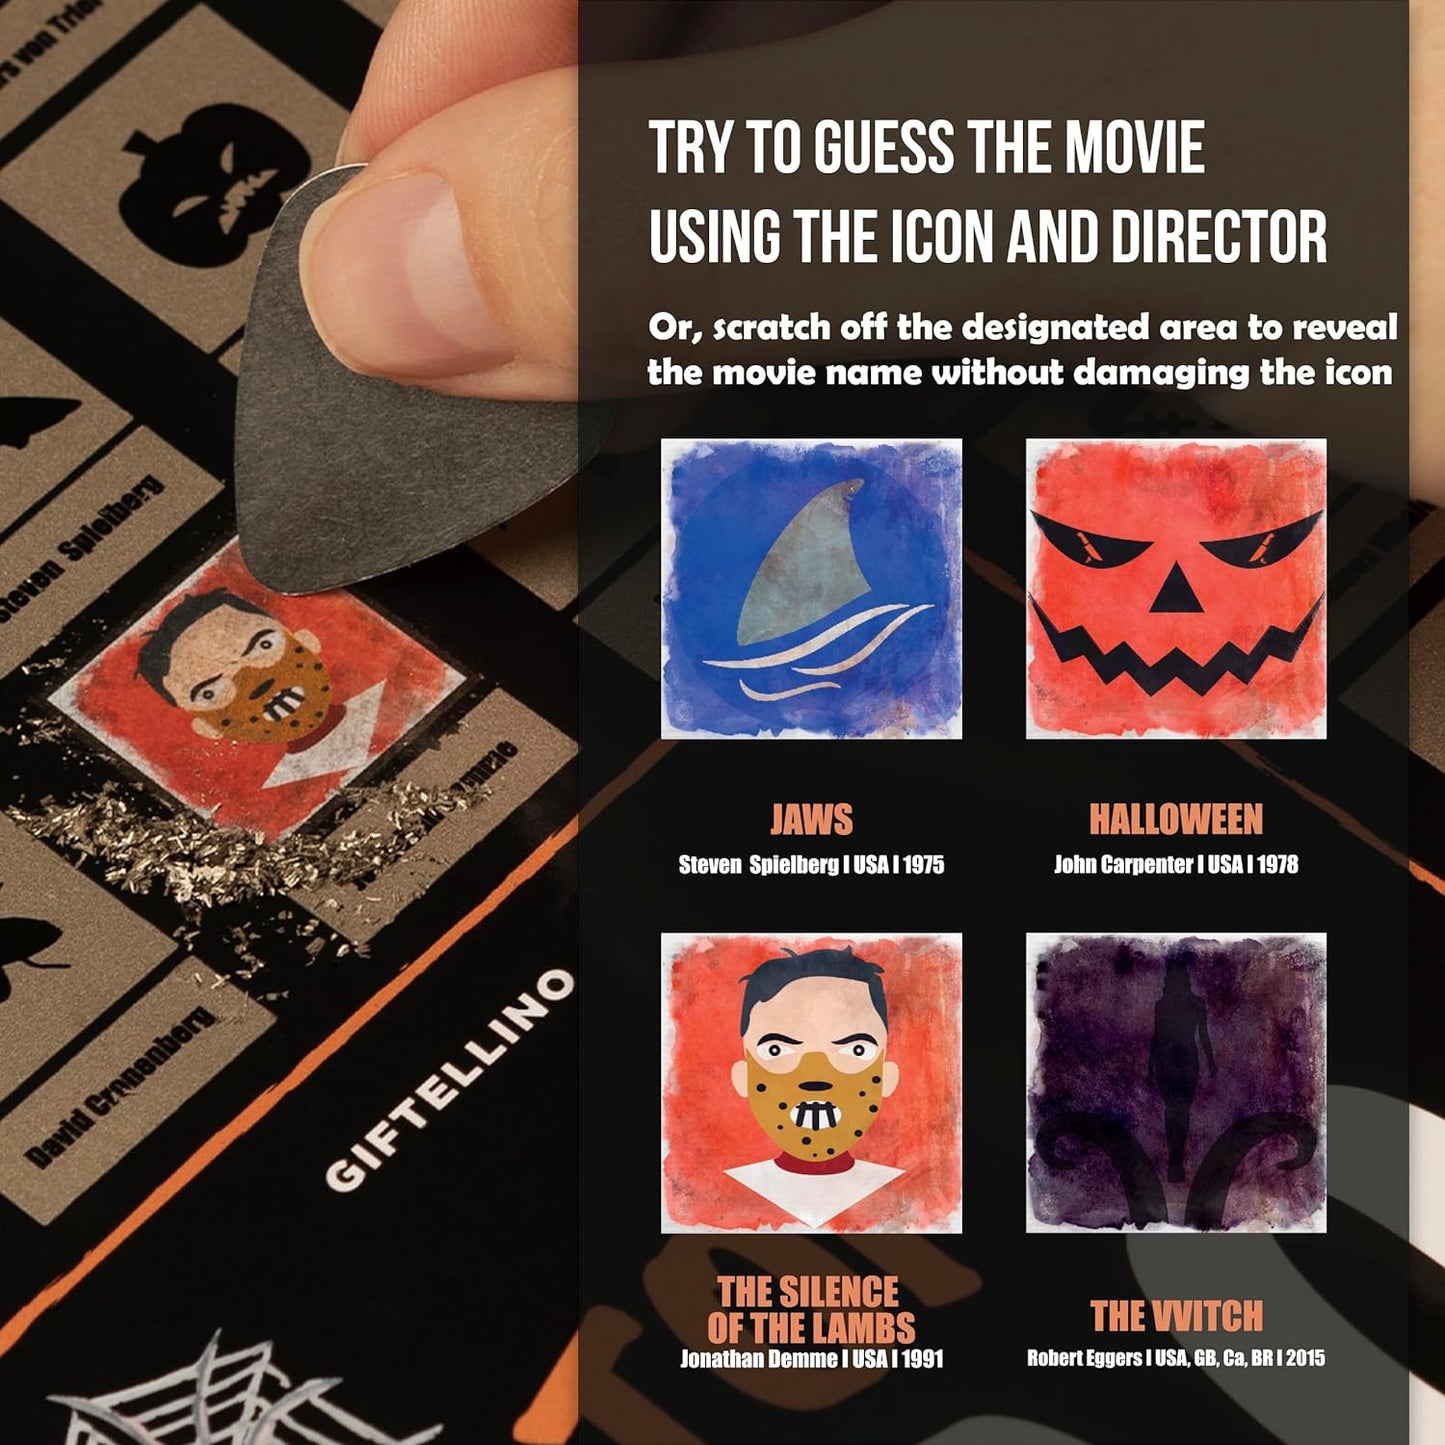 Top 100 Horror Movies Scratch off Poster - Easy to Frame Horror Movie Checklist - Must See Movie Challenge - Horror Fan Gifts